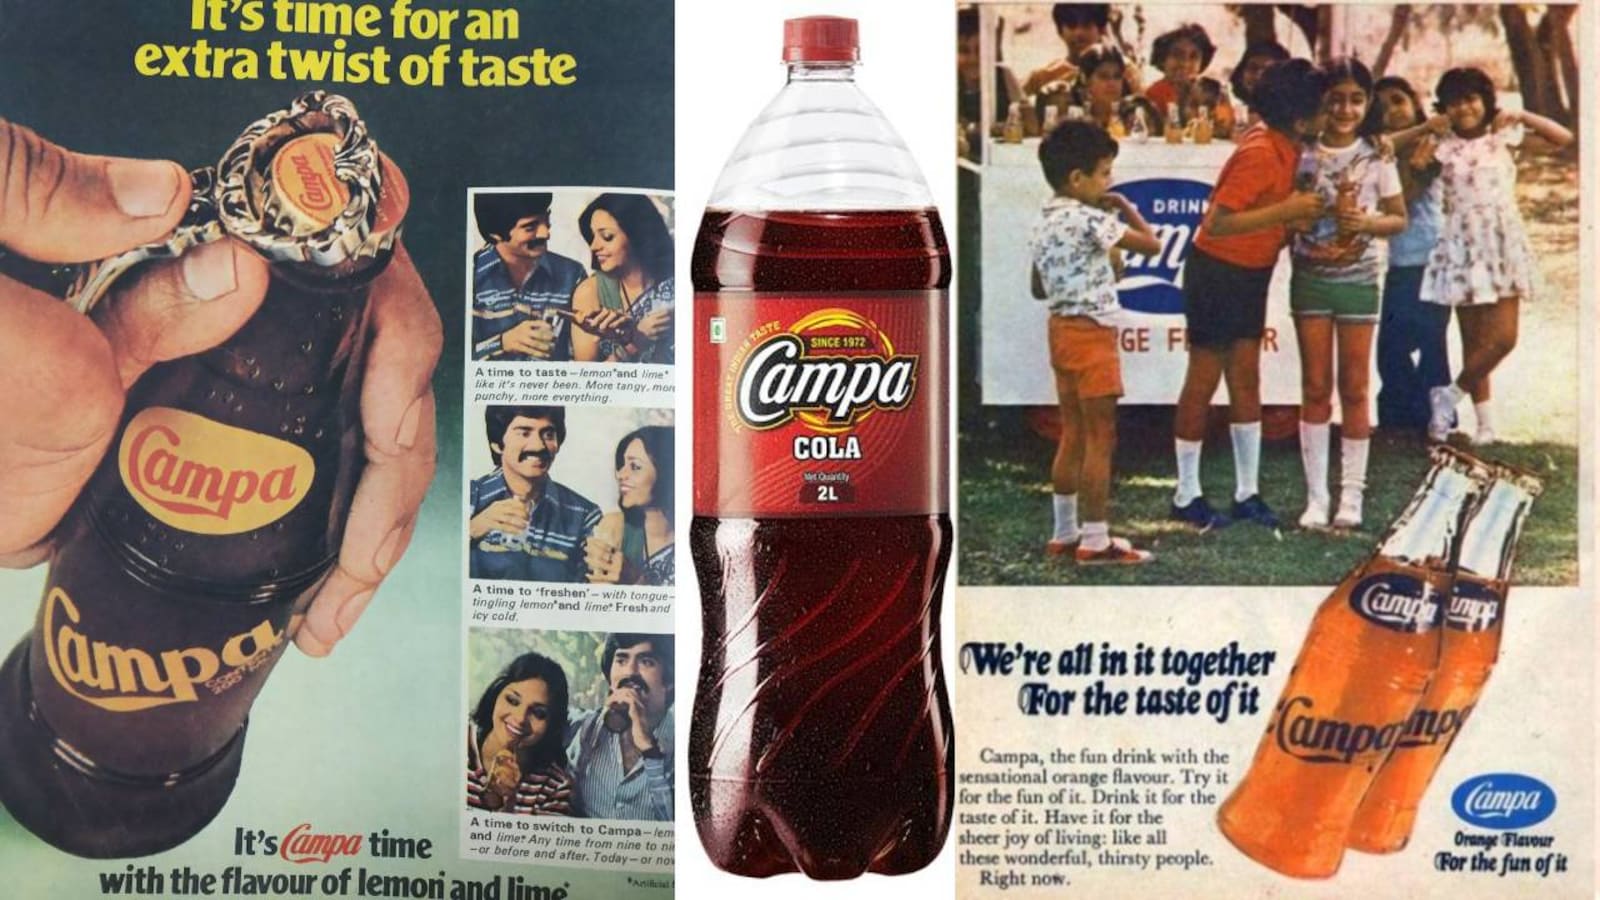 Campa Cola - India's Favorite Refreshing Soft Drinks